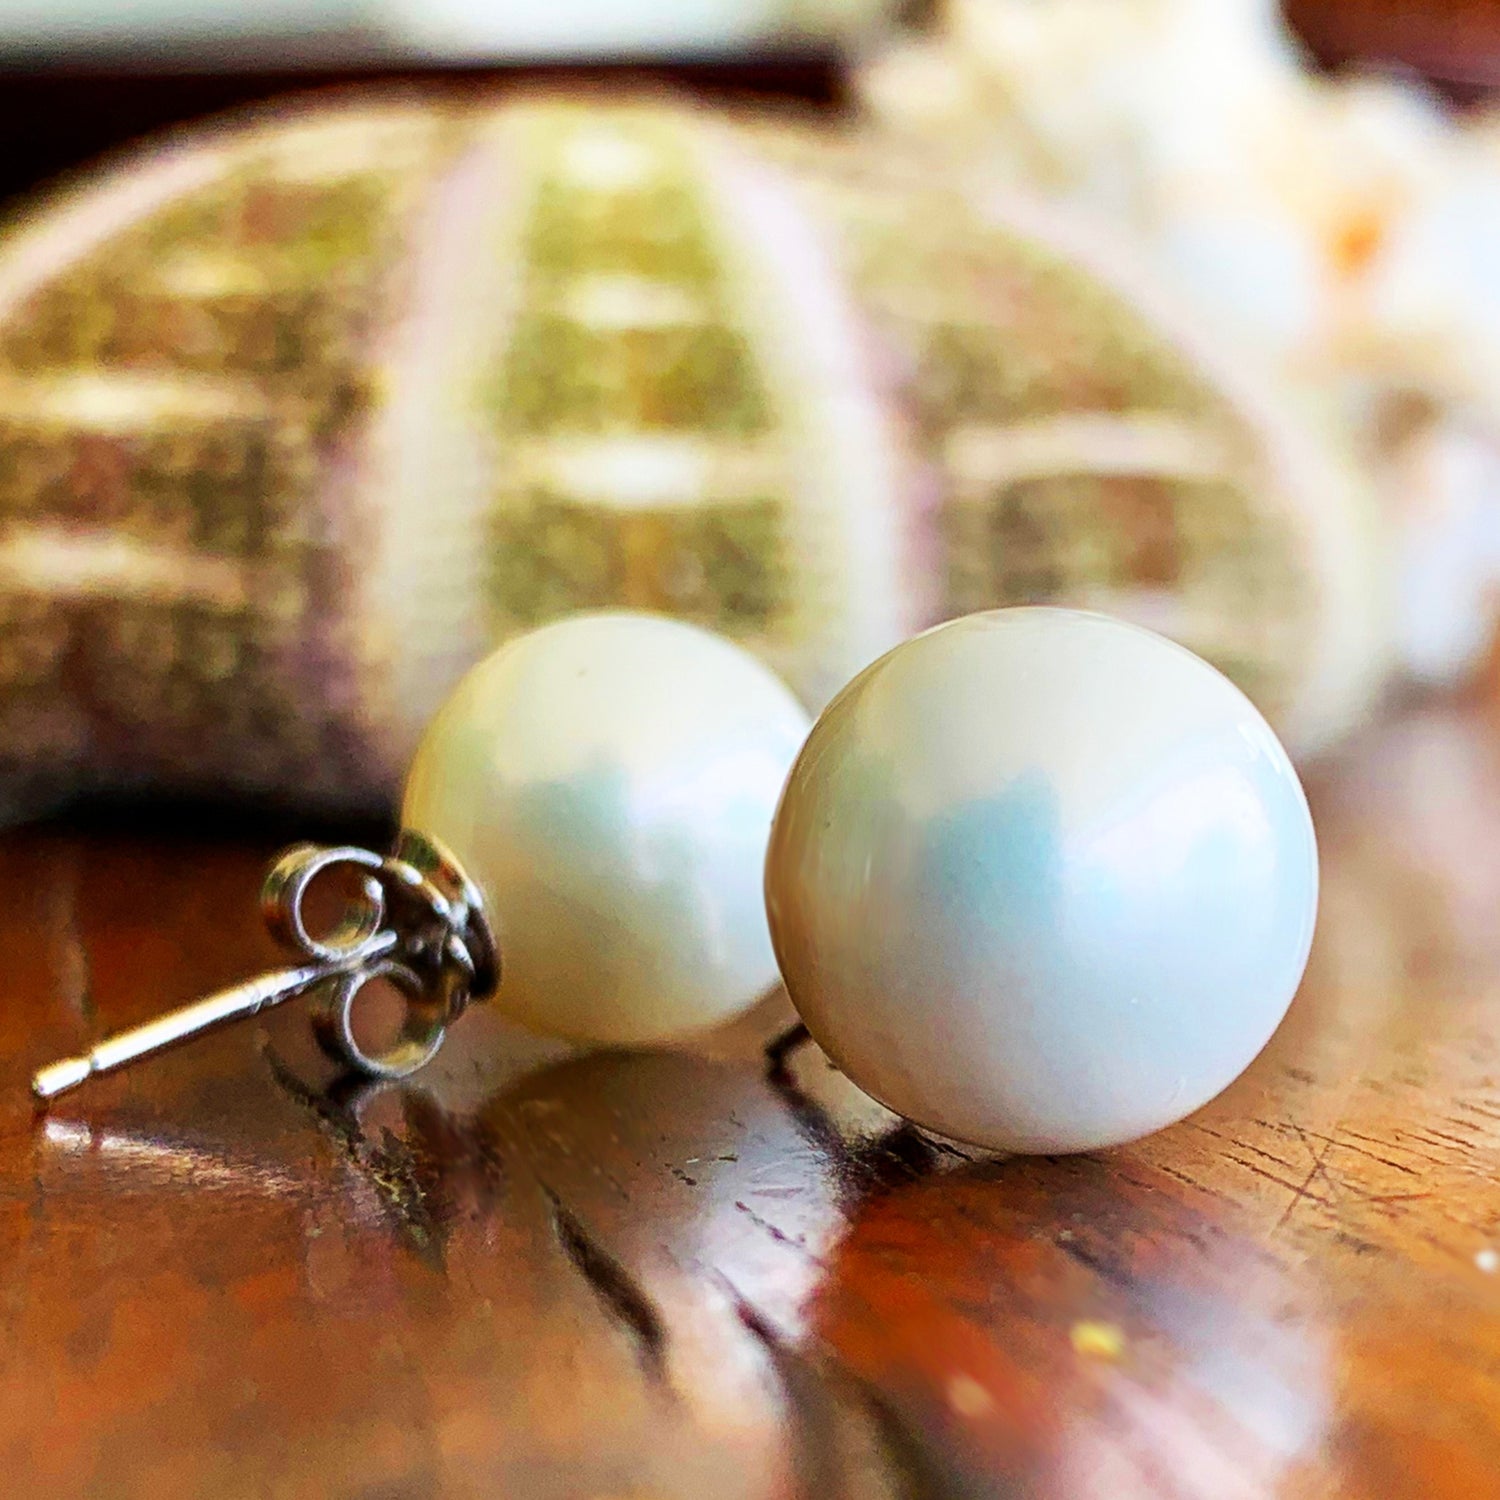 White 12mm shell pearls with sterling silver posts.